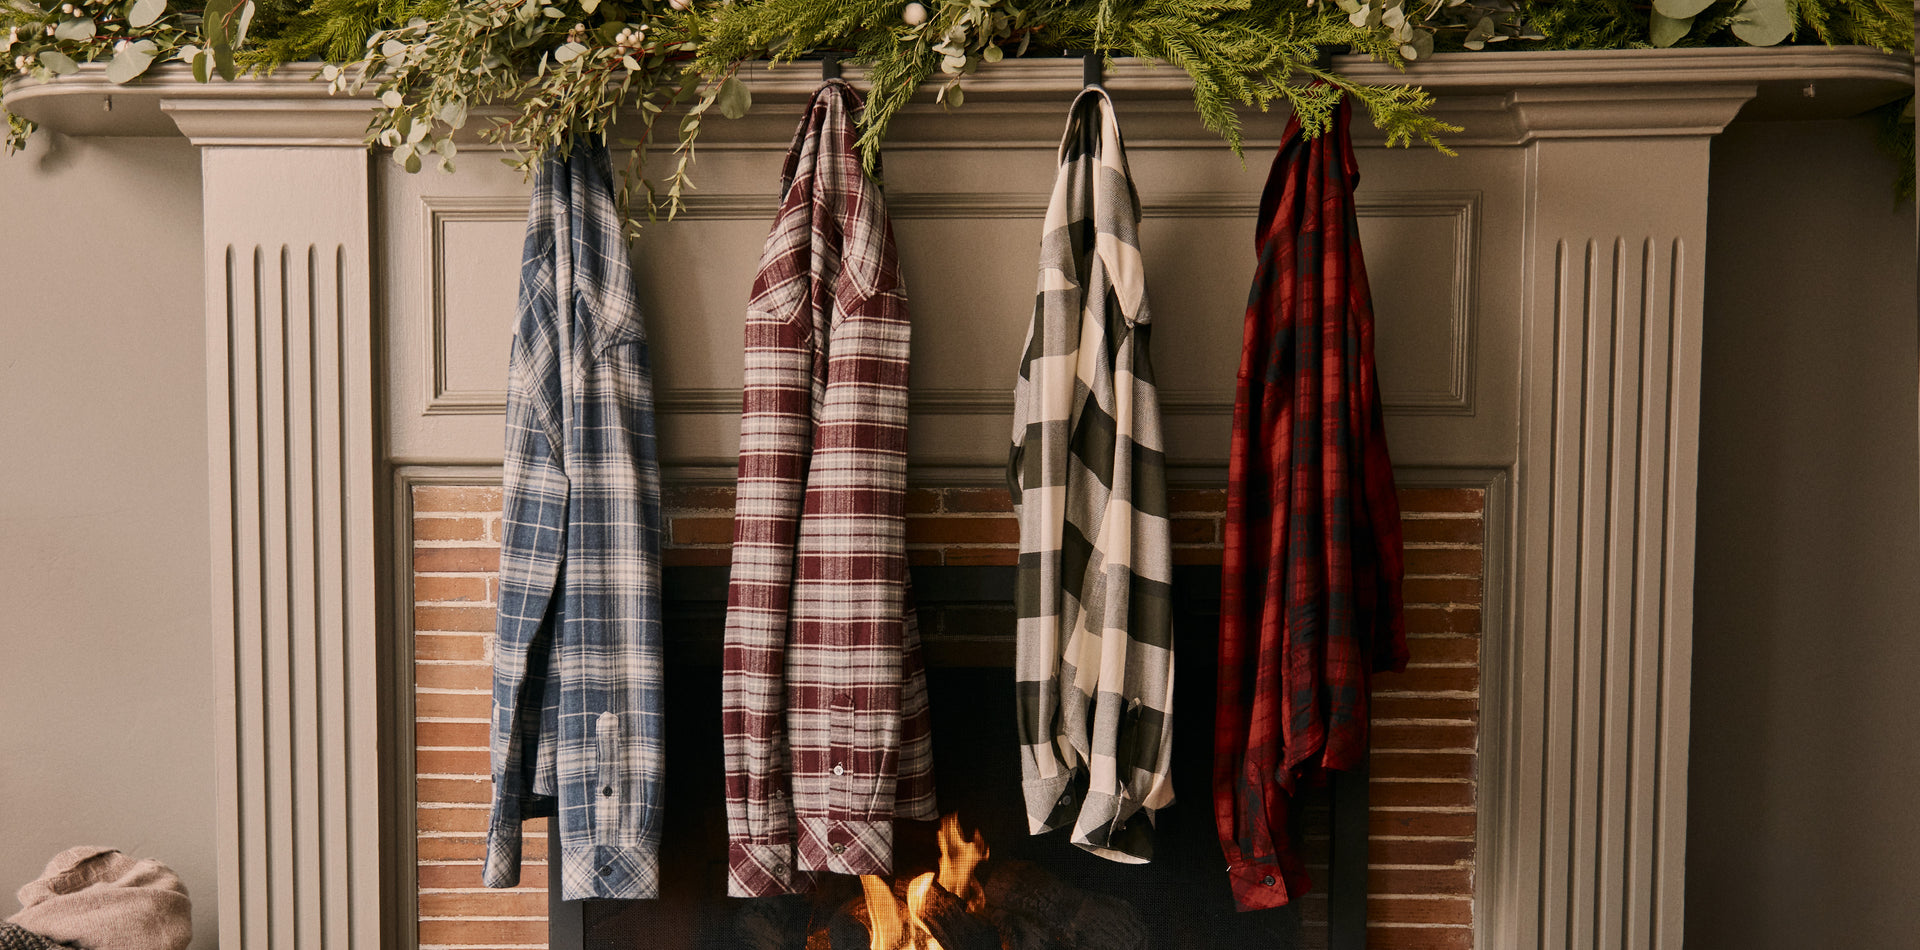 EDITORIAL IMAGE OF MULTIPLE SHIRTS HANGING ON A FIREPLACE